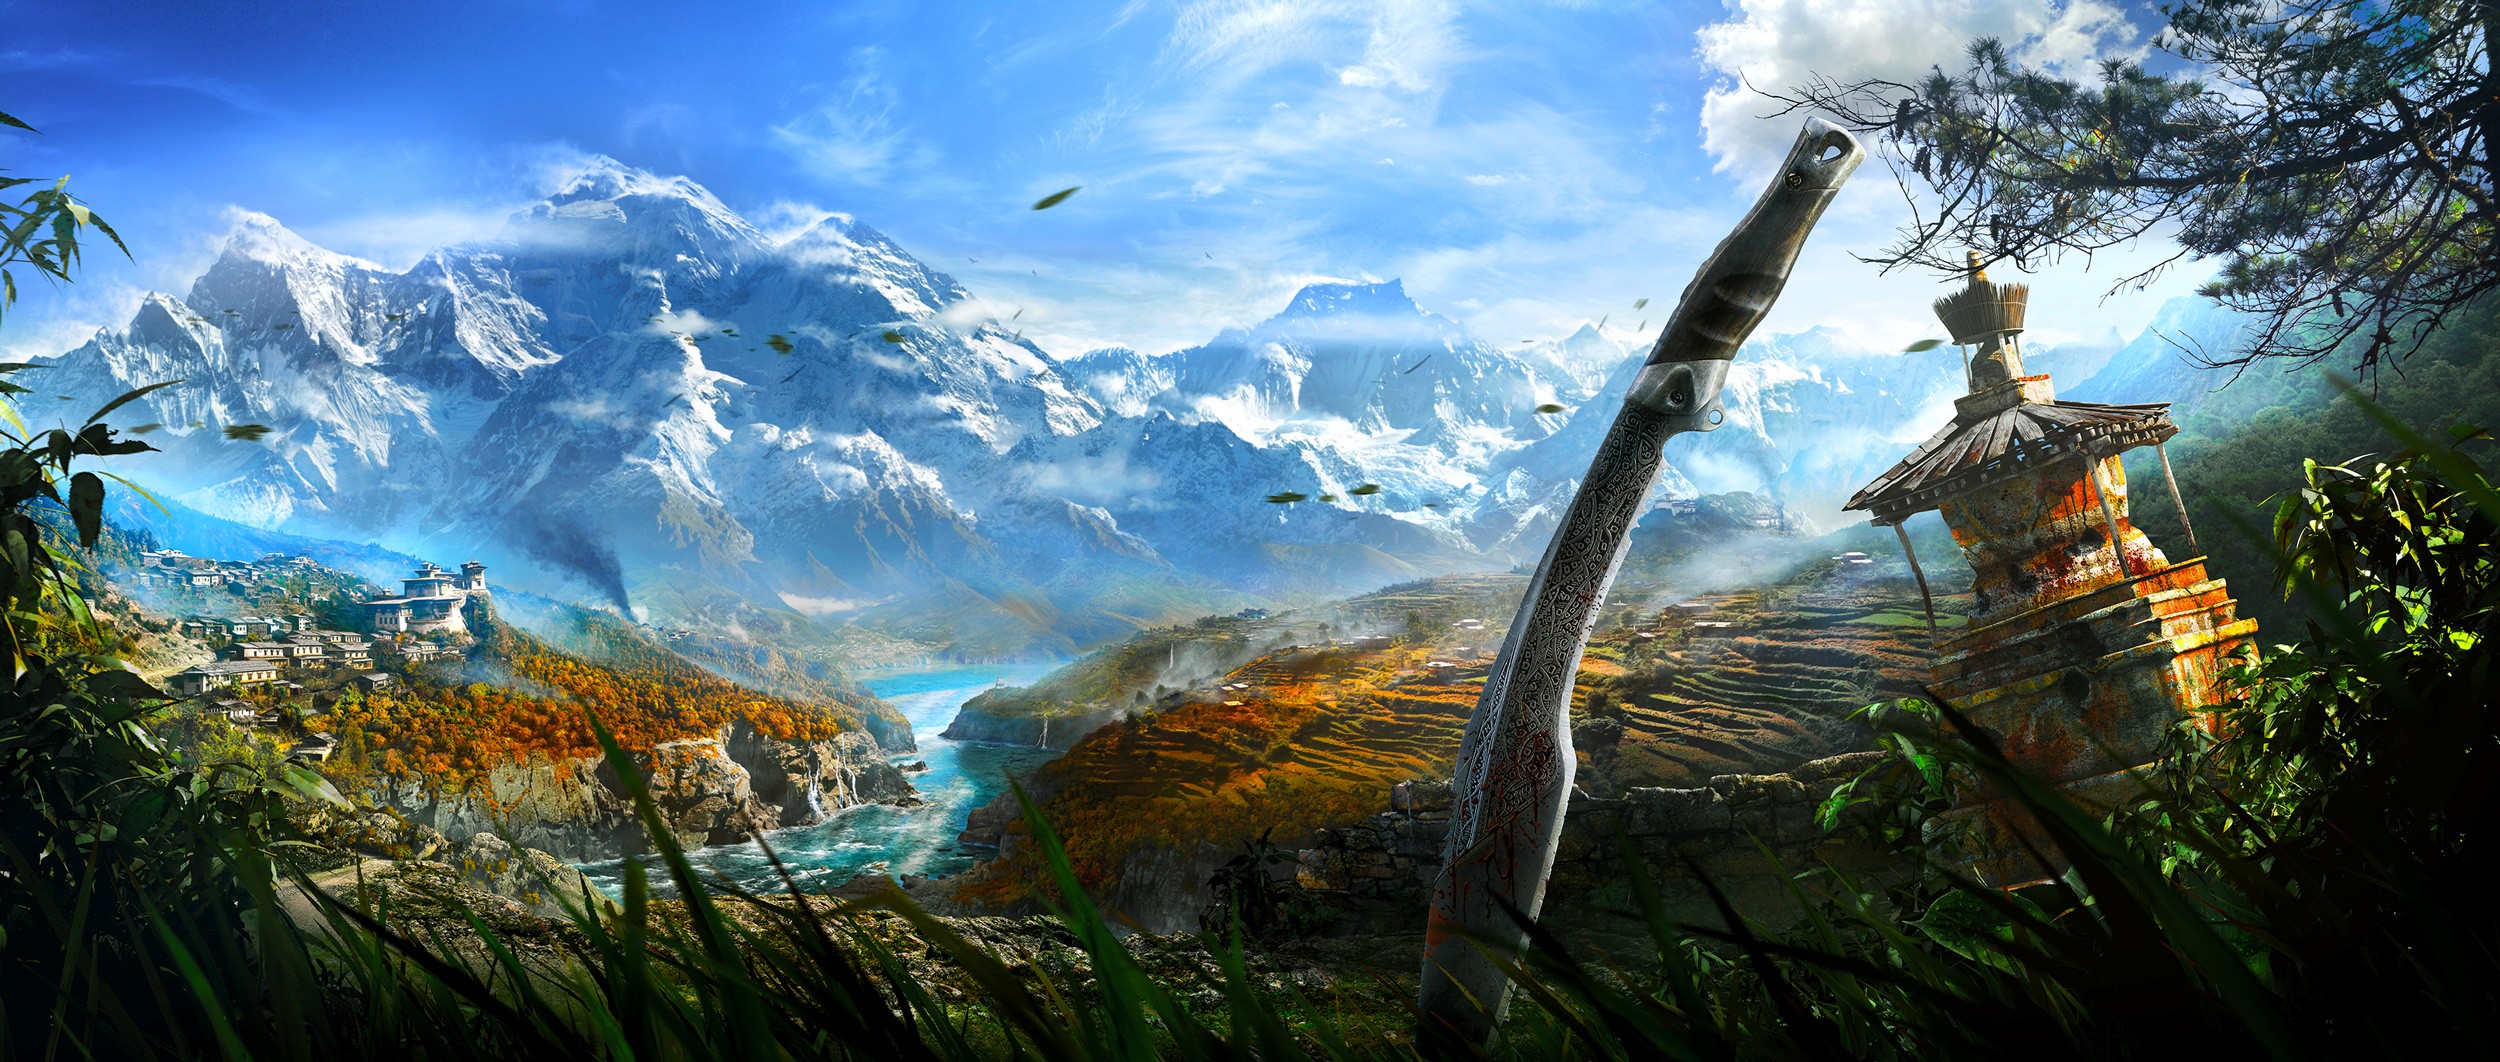 General 2500x1062 video games Far Cry 4 video game landscape video game art Ubisoft